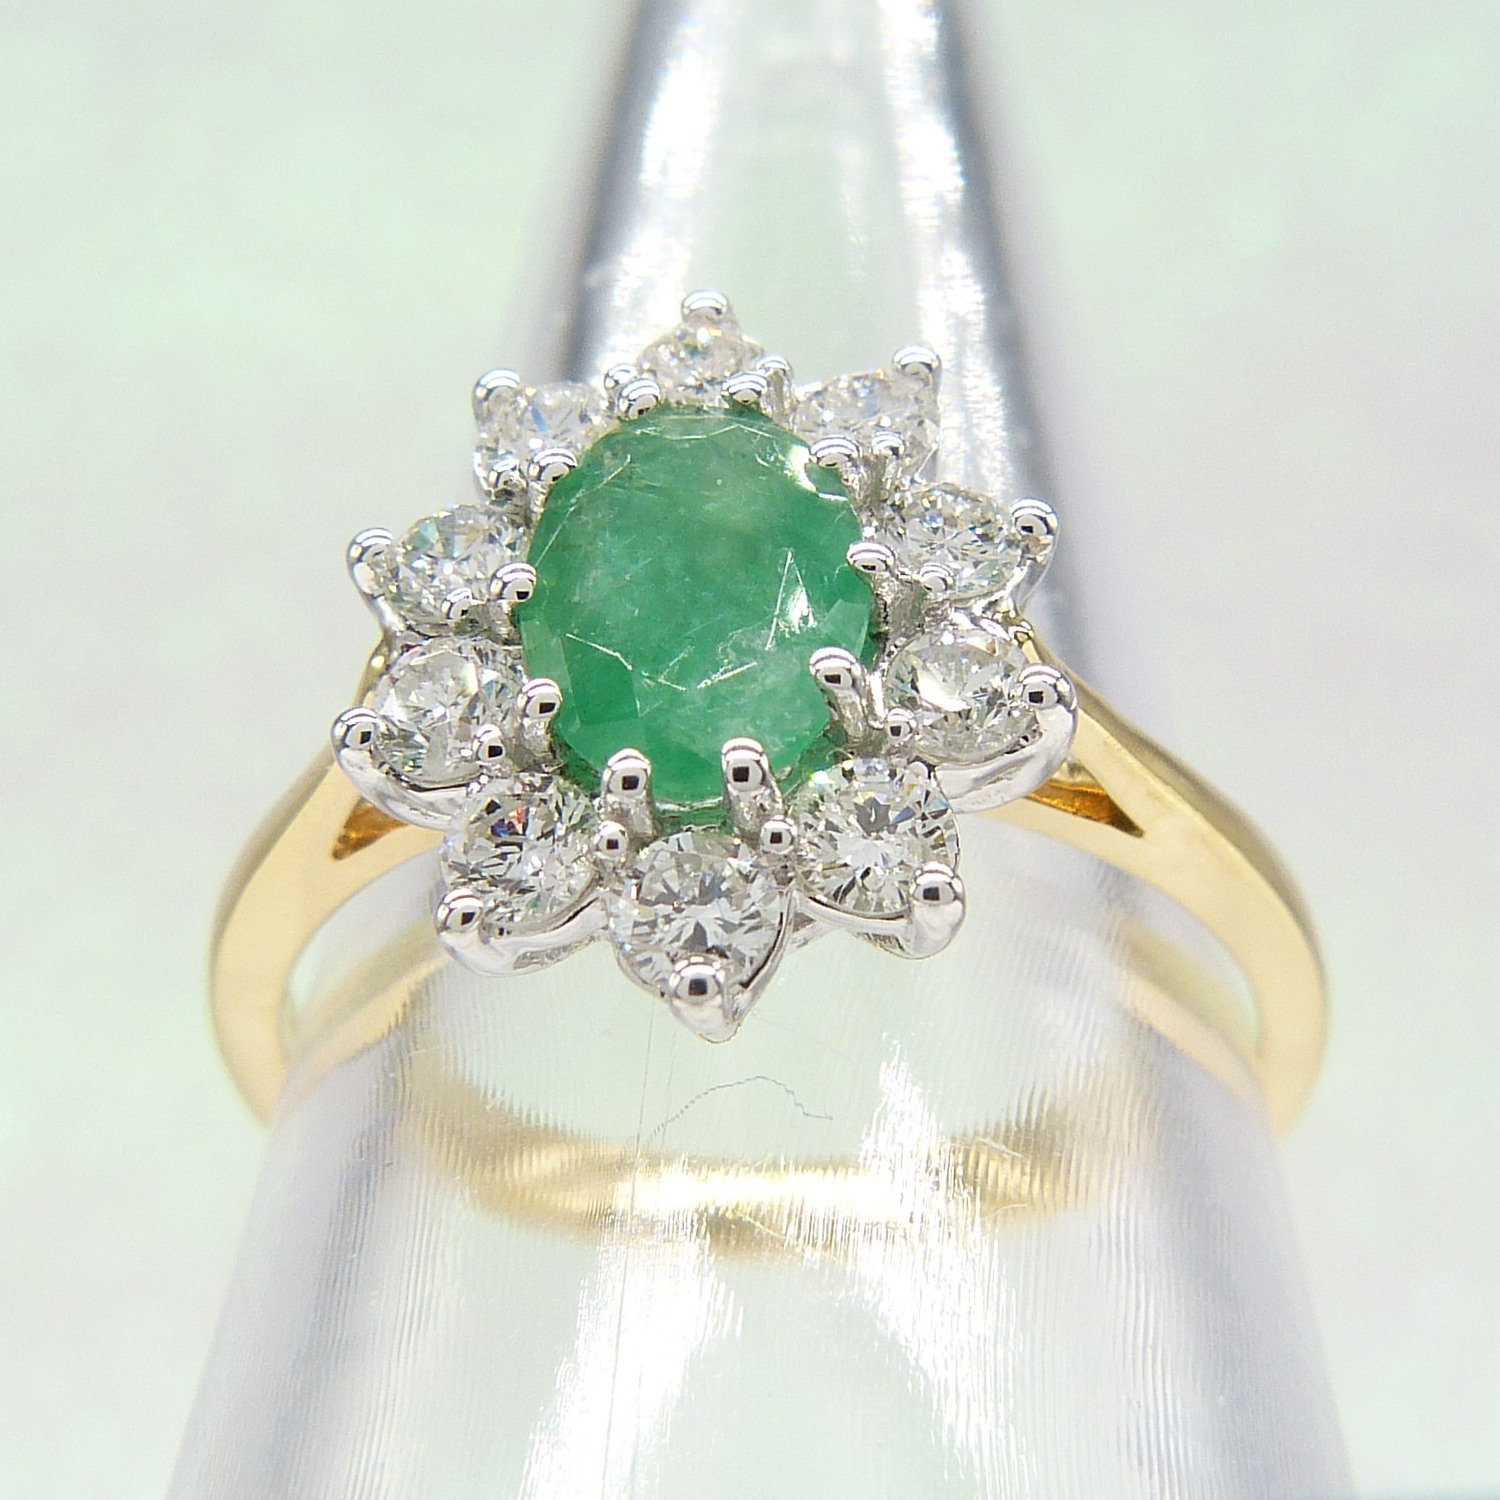 Certificated 18ct Yellow and White Gold Emerald and Diamond Cluster Ring - Image 7 of 7